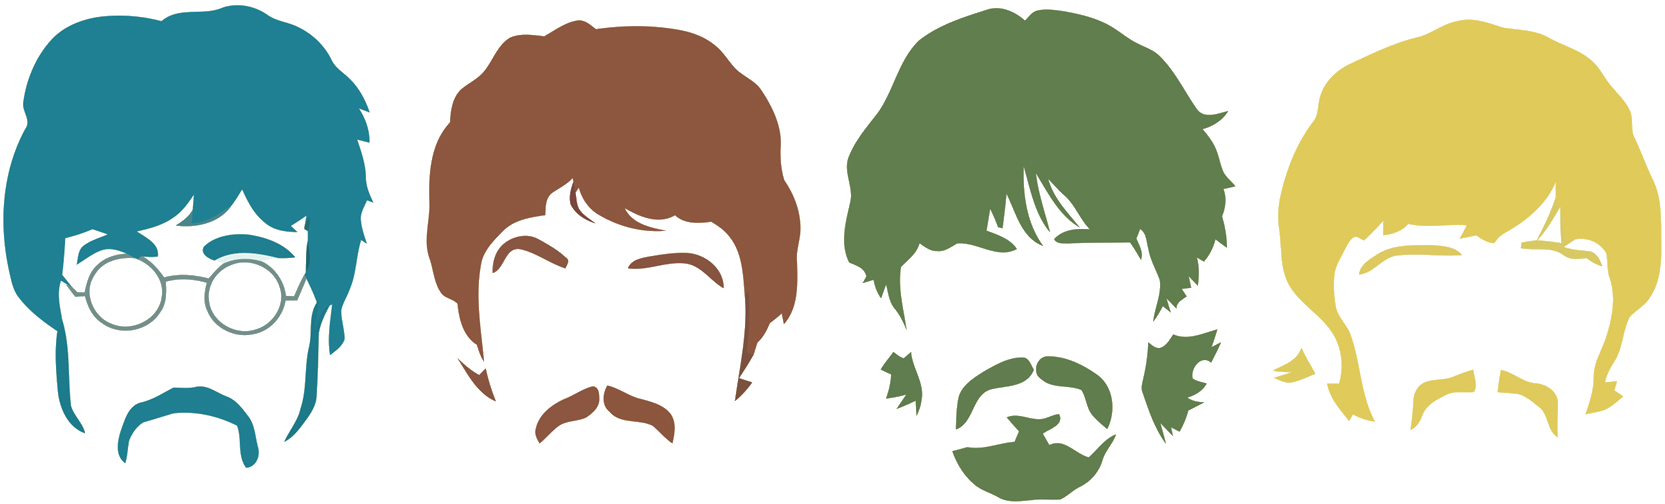 Beatles Png Photo - Beatles Silhouette (1707x537), Png Download